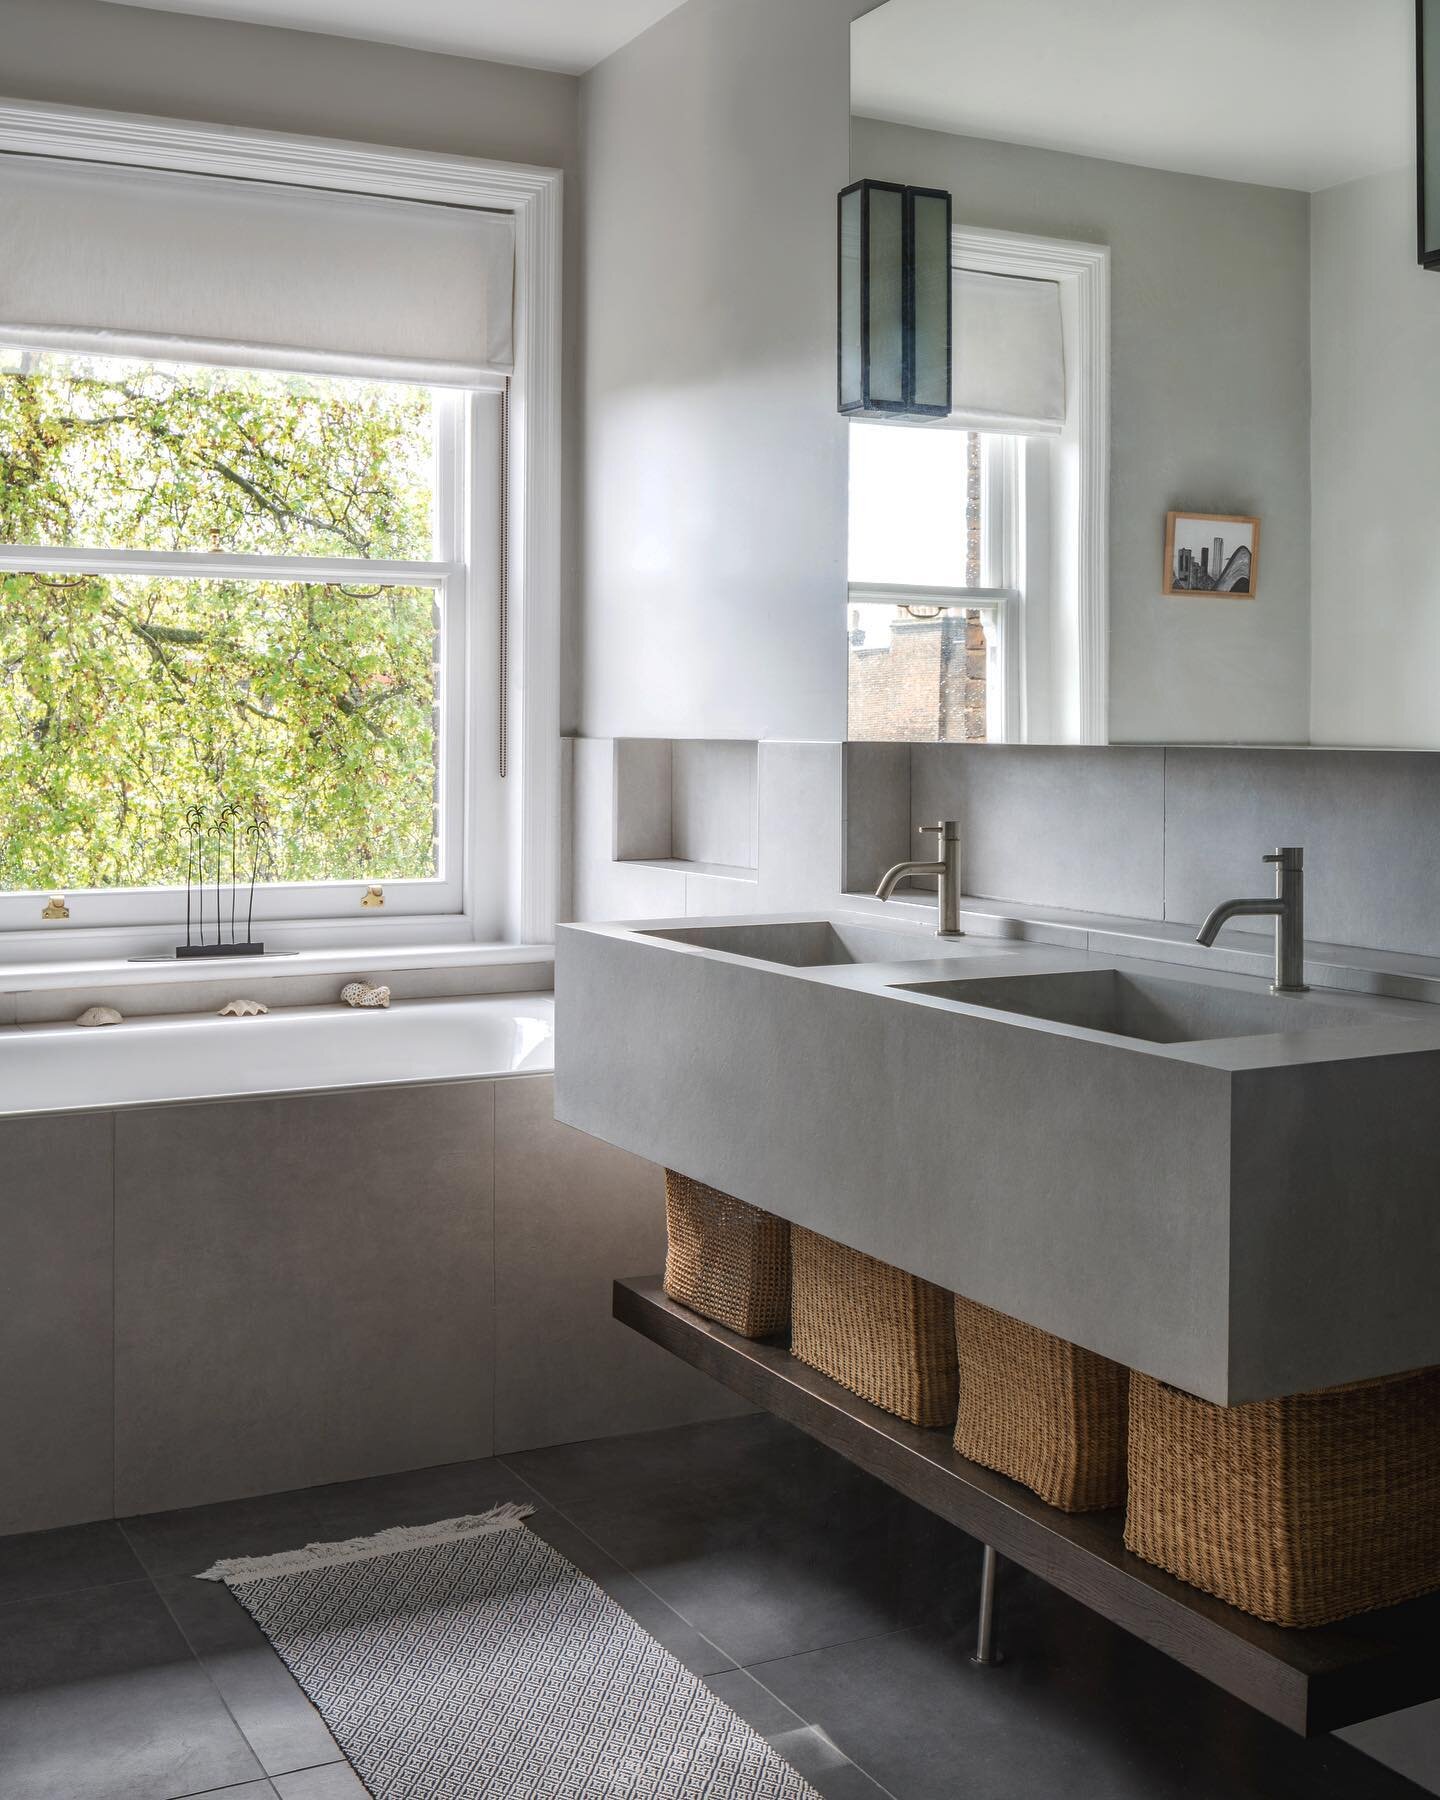 A jungle bath 🌳🥰

A concrete - esque bathroom with the perfect view. Bespoke porcelain grey double sink, warmed up with wicker baskets and a beautiful view while chilling out 🛀 

Photo by @vigojansons 

#interiordesign #design #refurbishment #refu